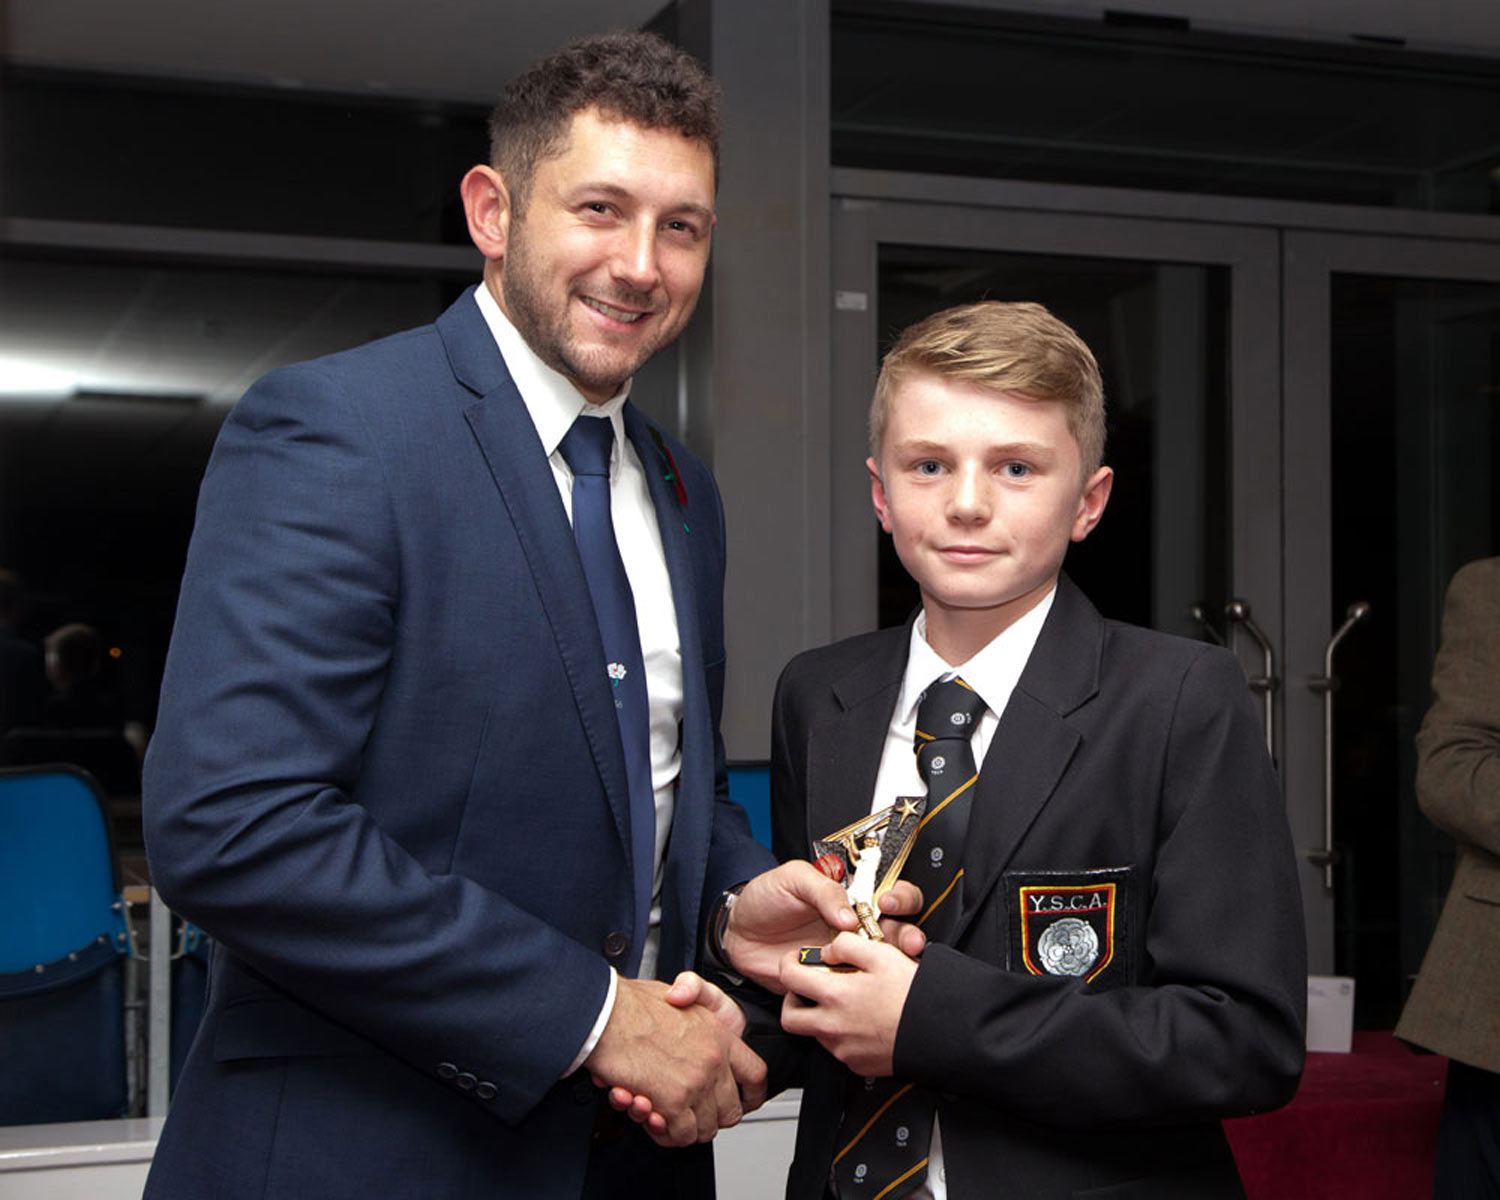 Olly Lamb receiving his award from Yorkshire CCC player Tim Bresnan